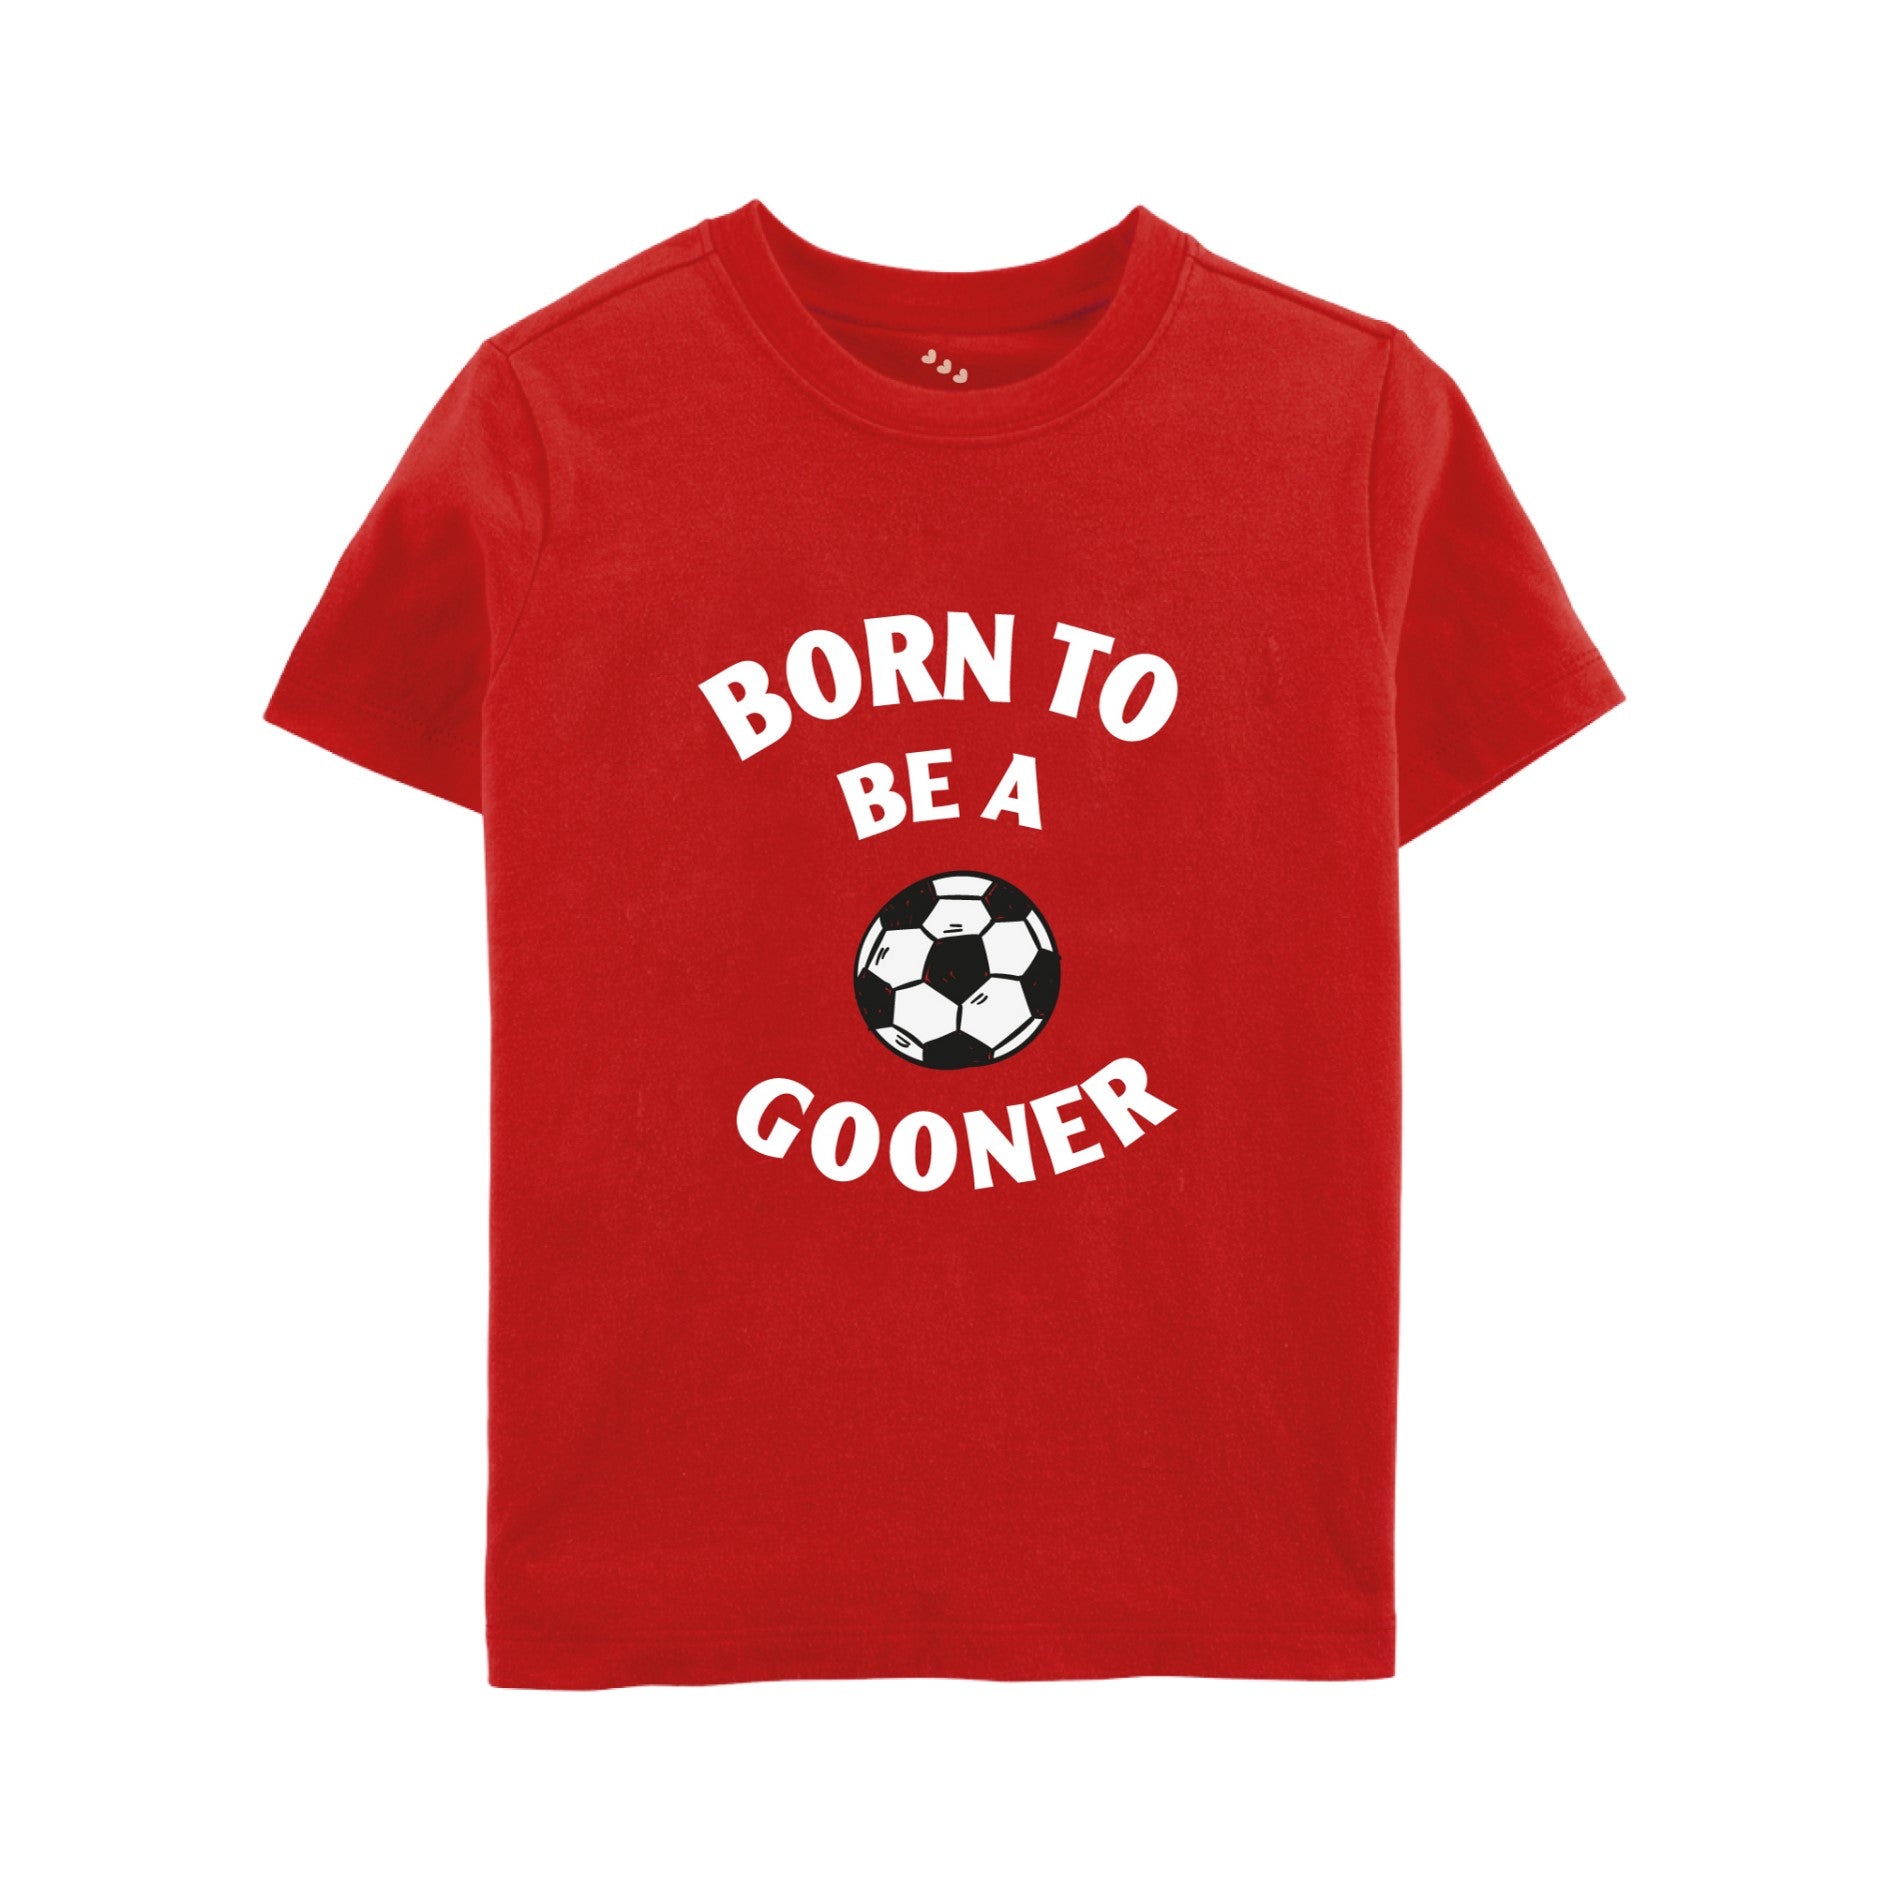 Born To Be A Gooner